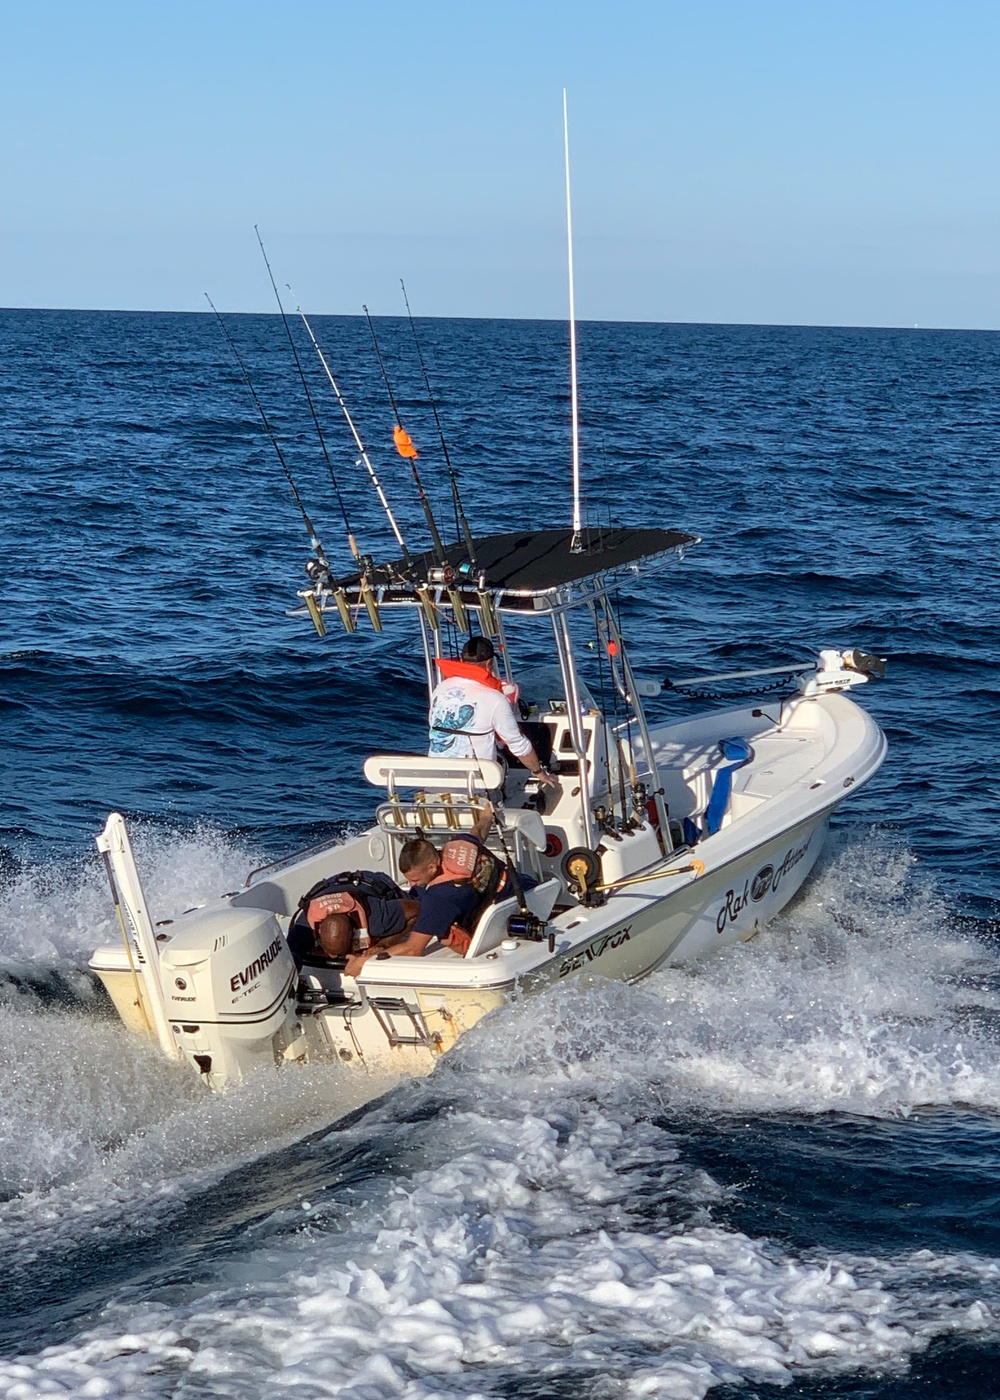 Coast Guard assists 3 near Clearwater, Florida